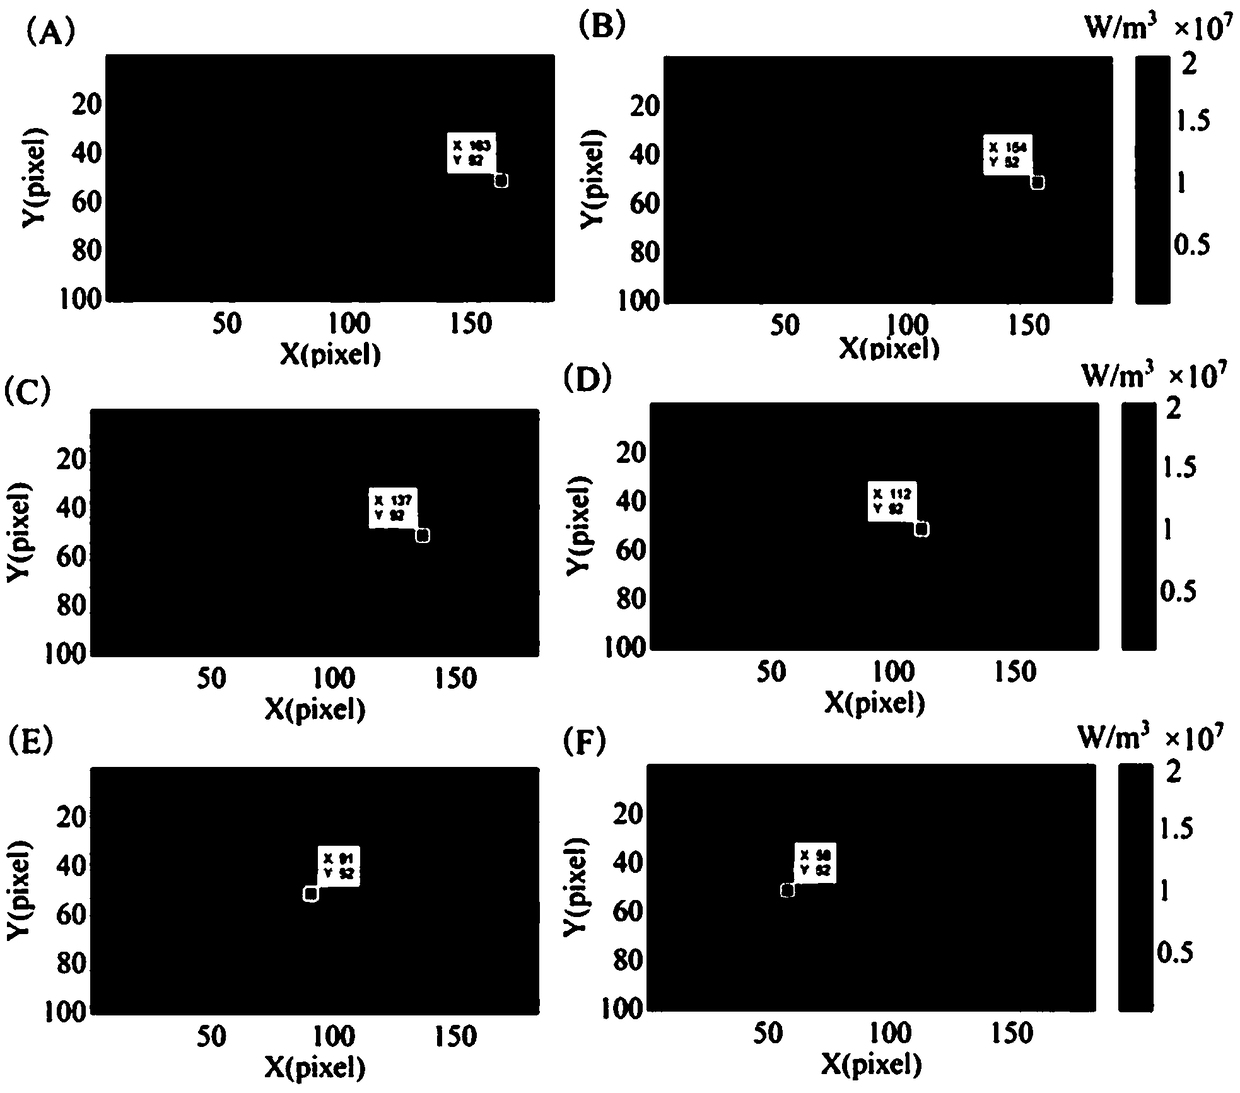 Fatigue crack growth rate measurement method based on infrared thermal imaging technology